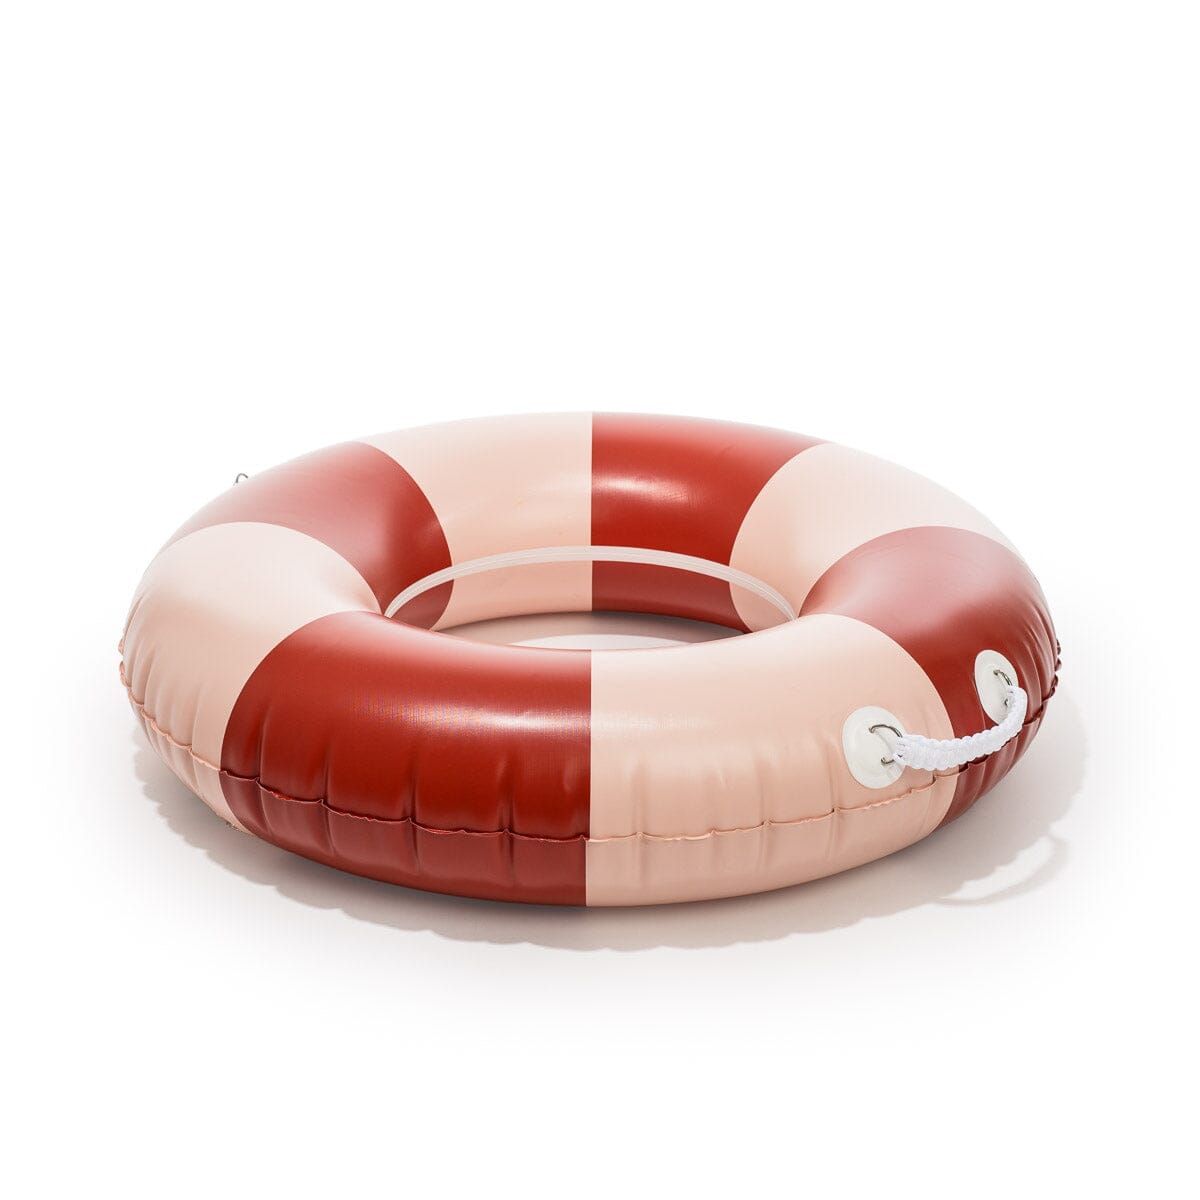 The Classic Pool Float - Large - Rivie Pink Pool Float Business & Pleasure Co Aus 